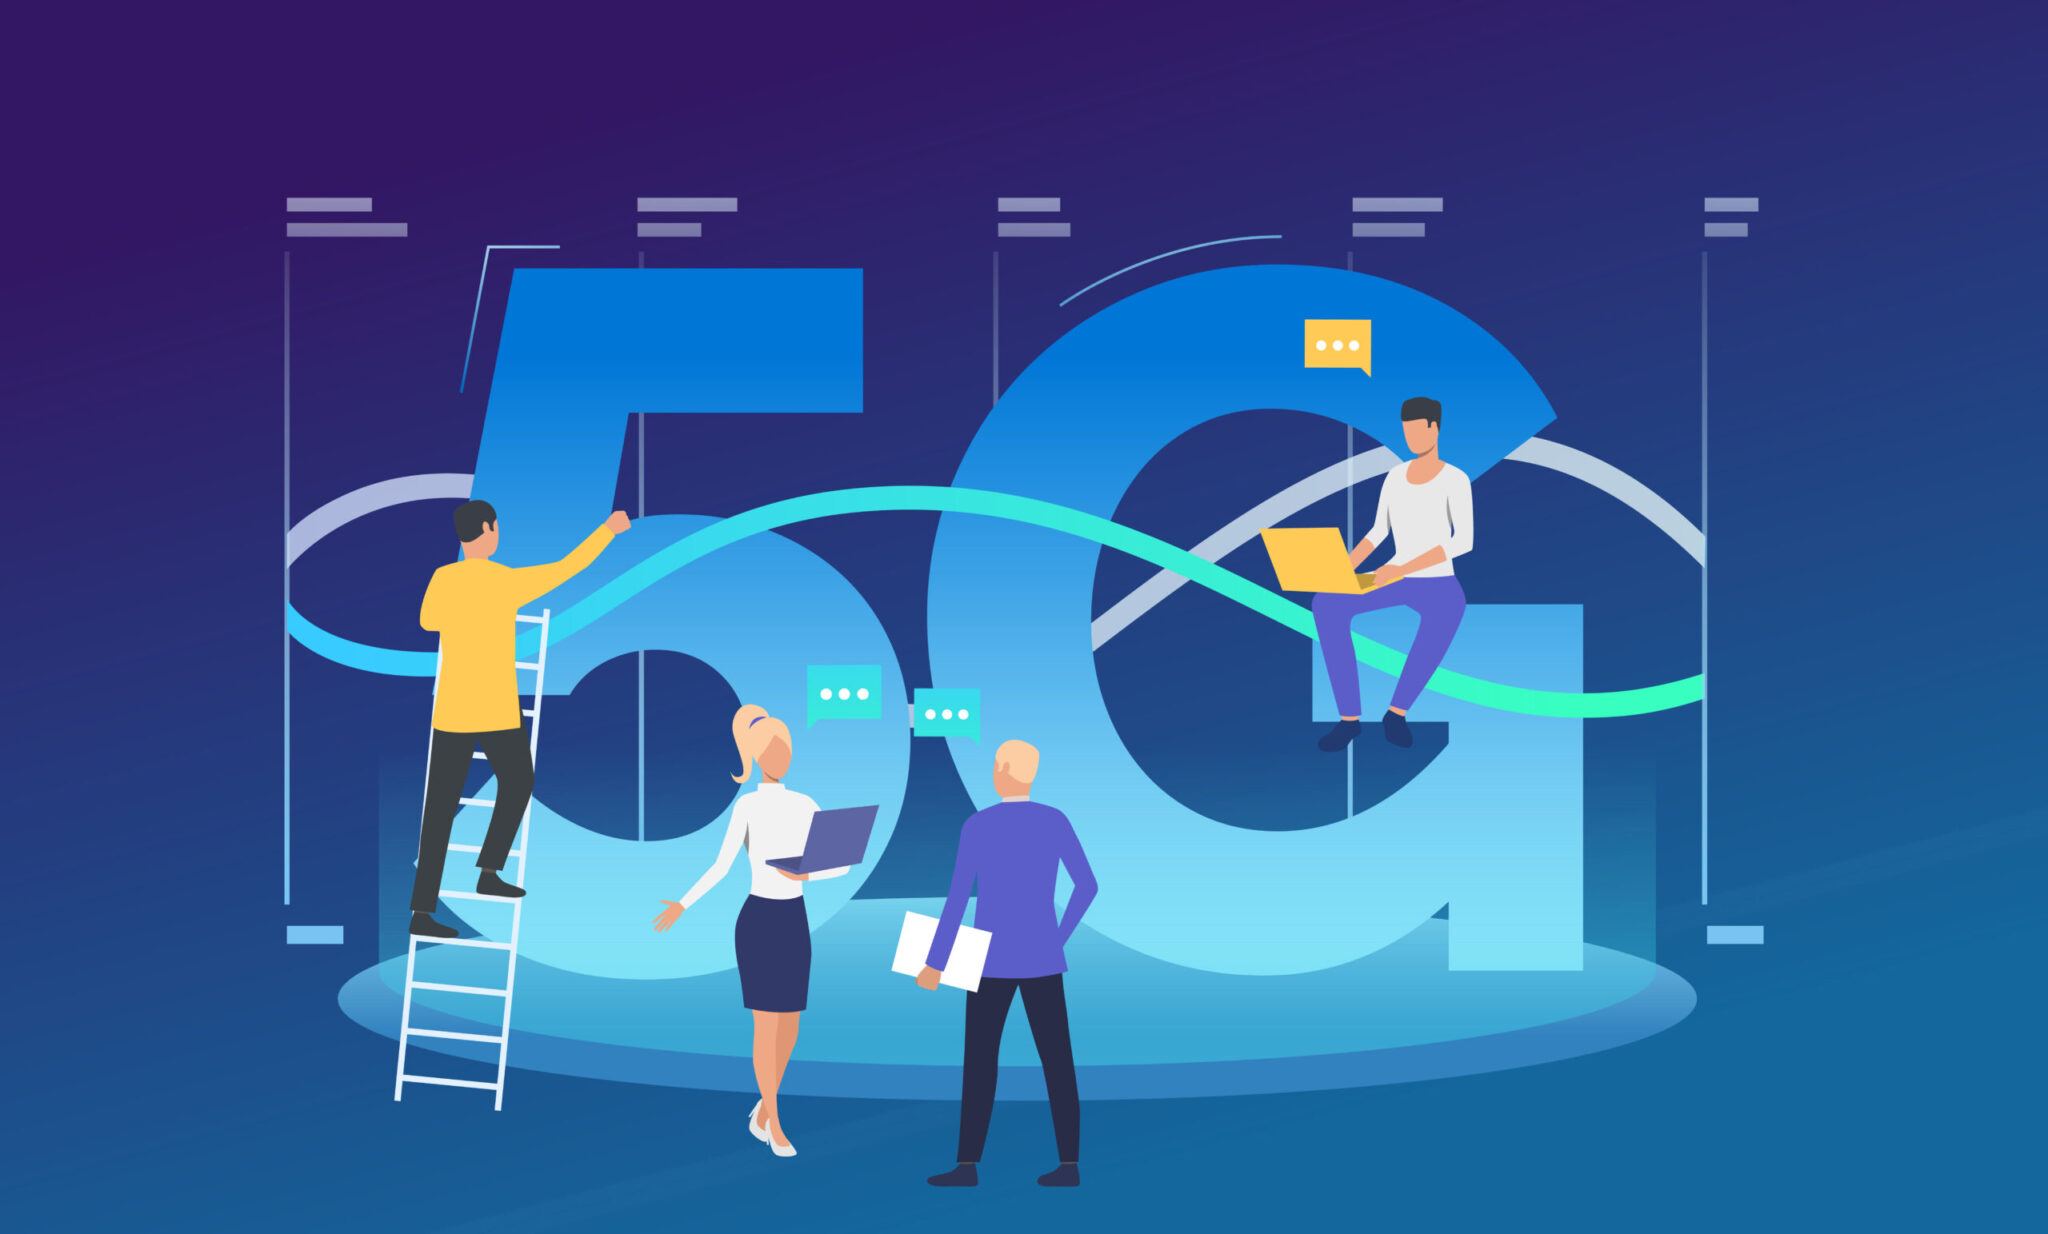 Developers working on 5G network. High speed connection, team, wifi. Technology concept. Vector illustration can be used for topics like fifth generation, cellular network, communication